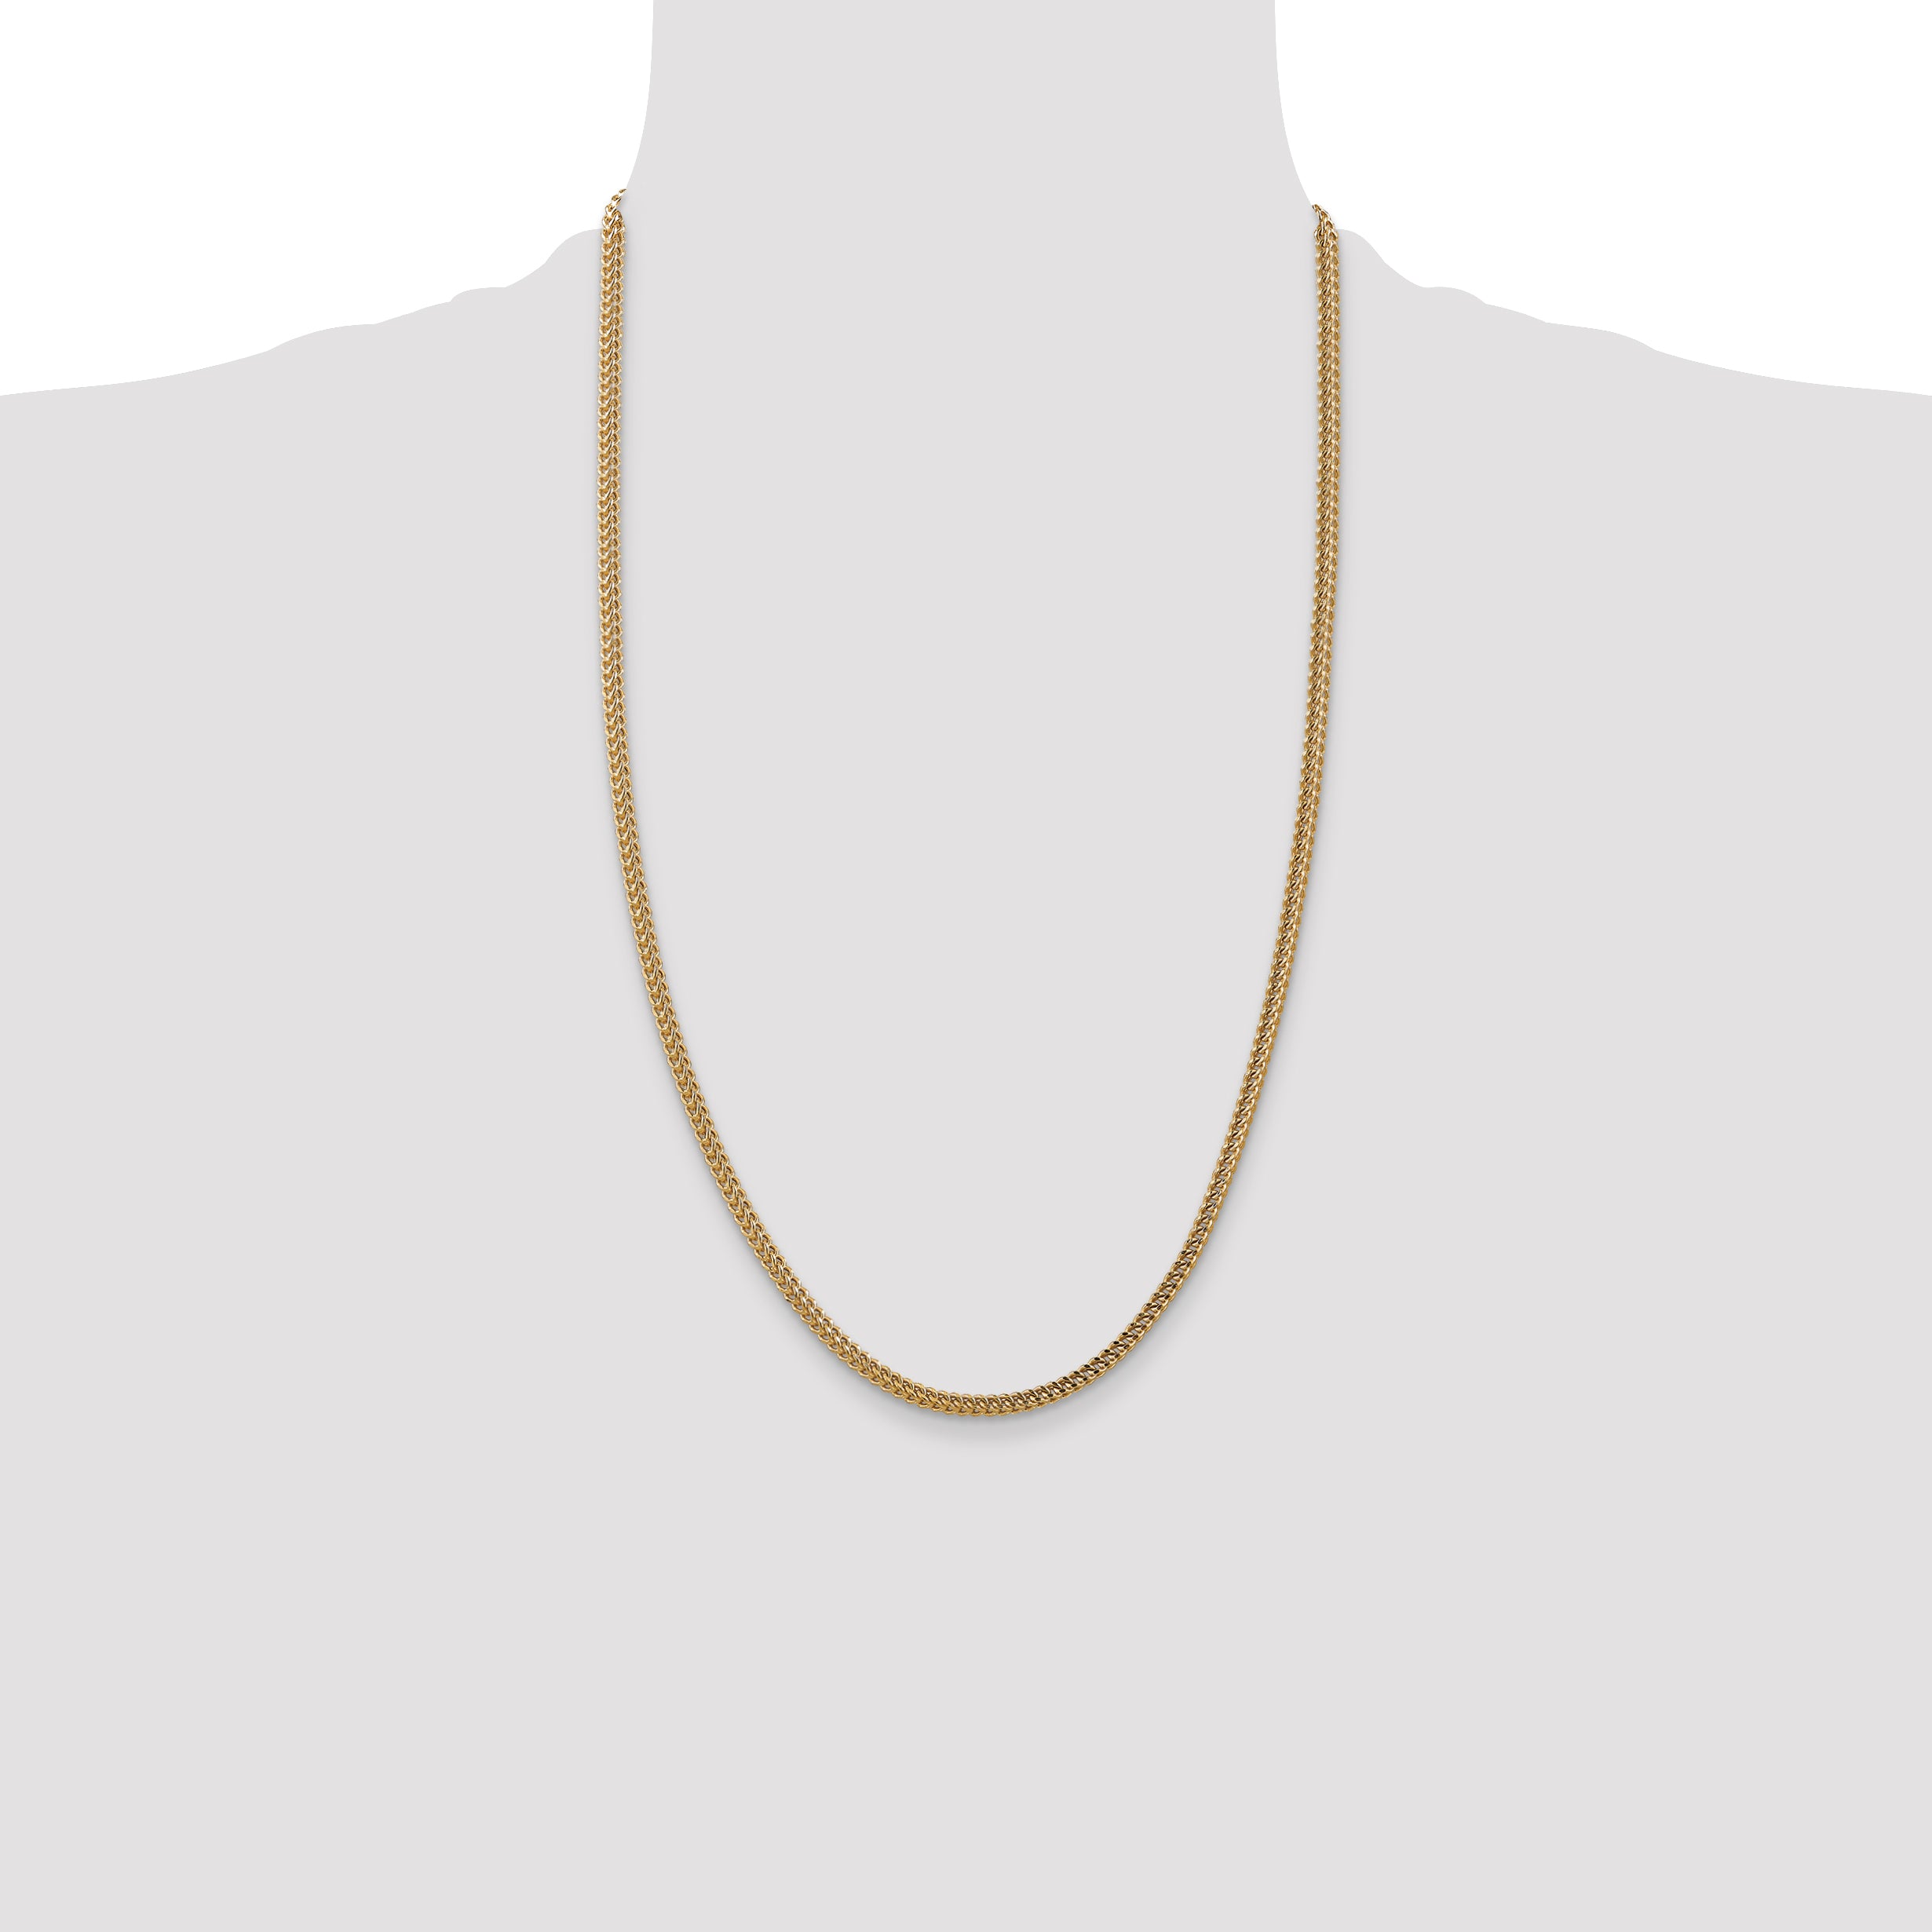 14K 18 inch 3mm Semi-Solid Franco with Fancy Lobster Clasp Chain